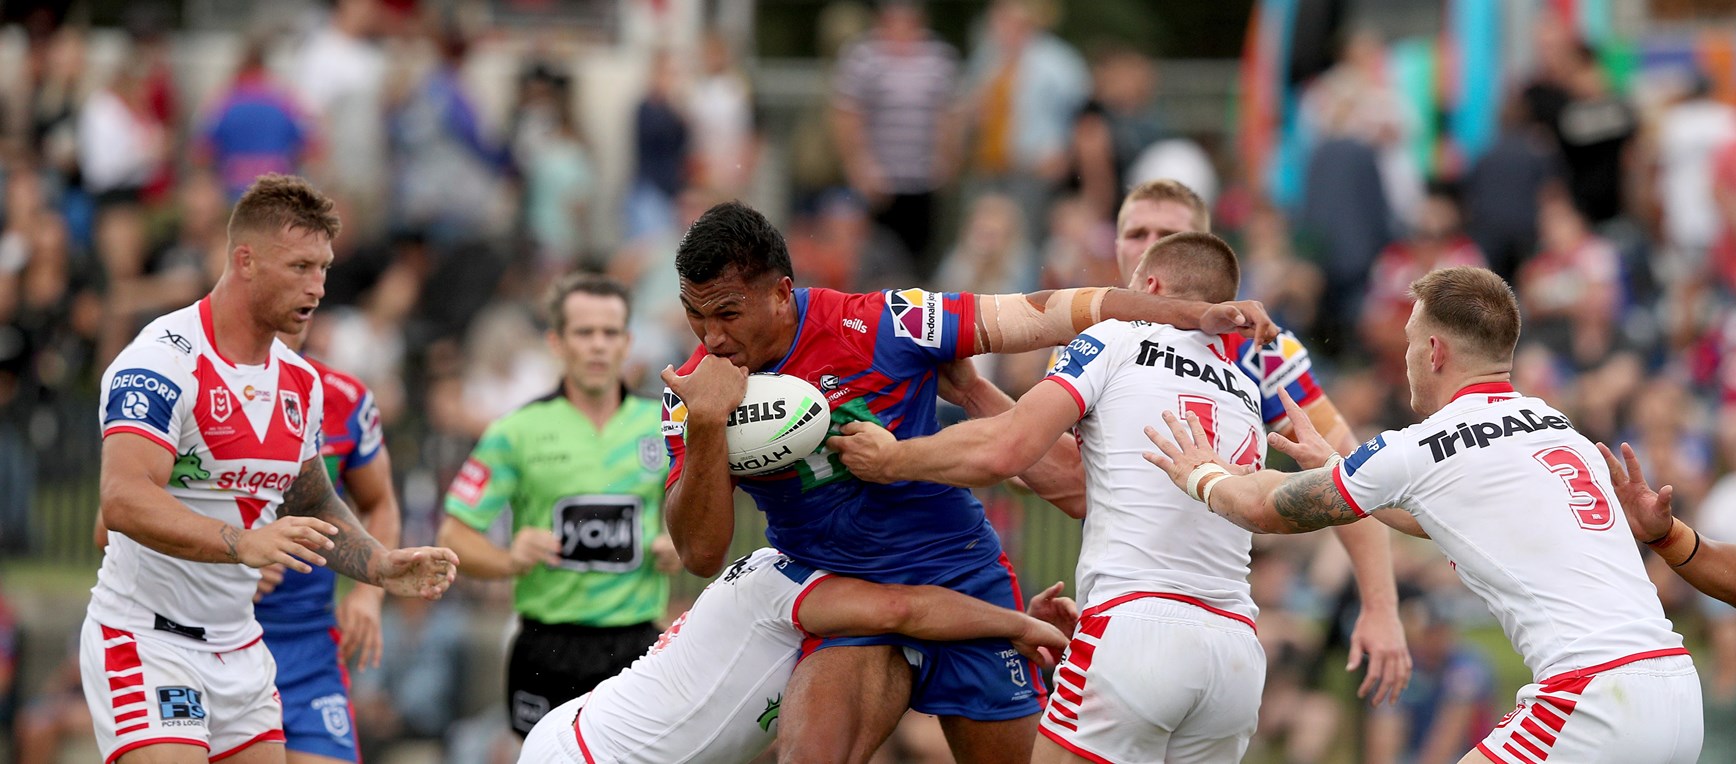 Best Shots: Dragons too good in Maitland